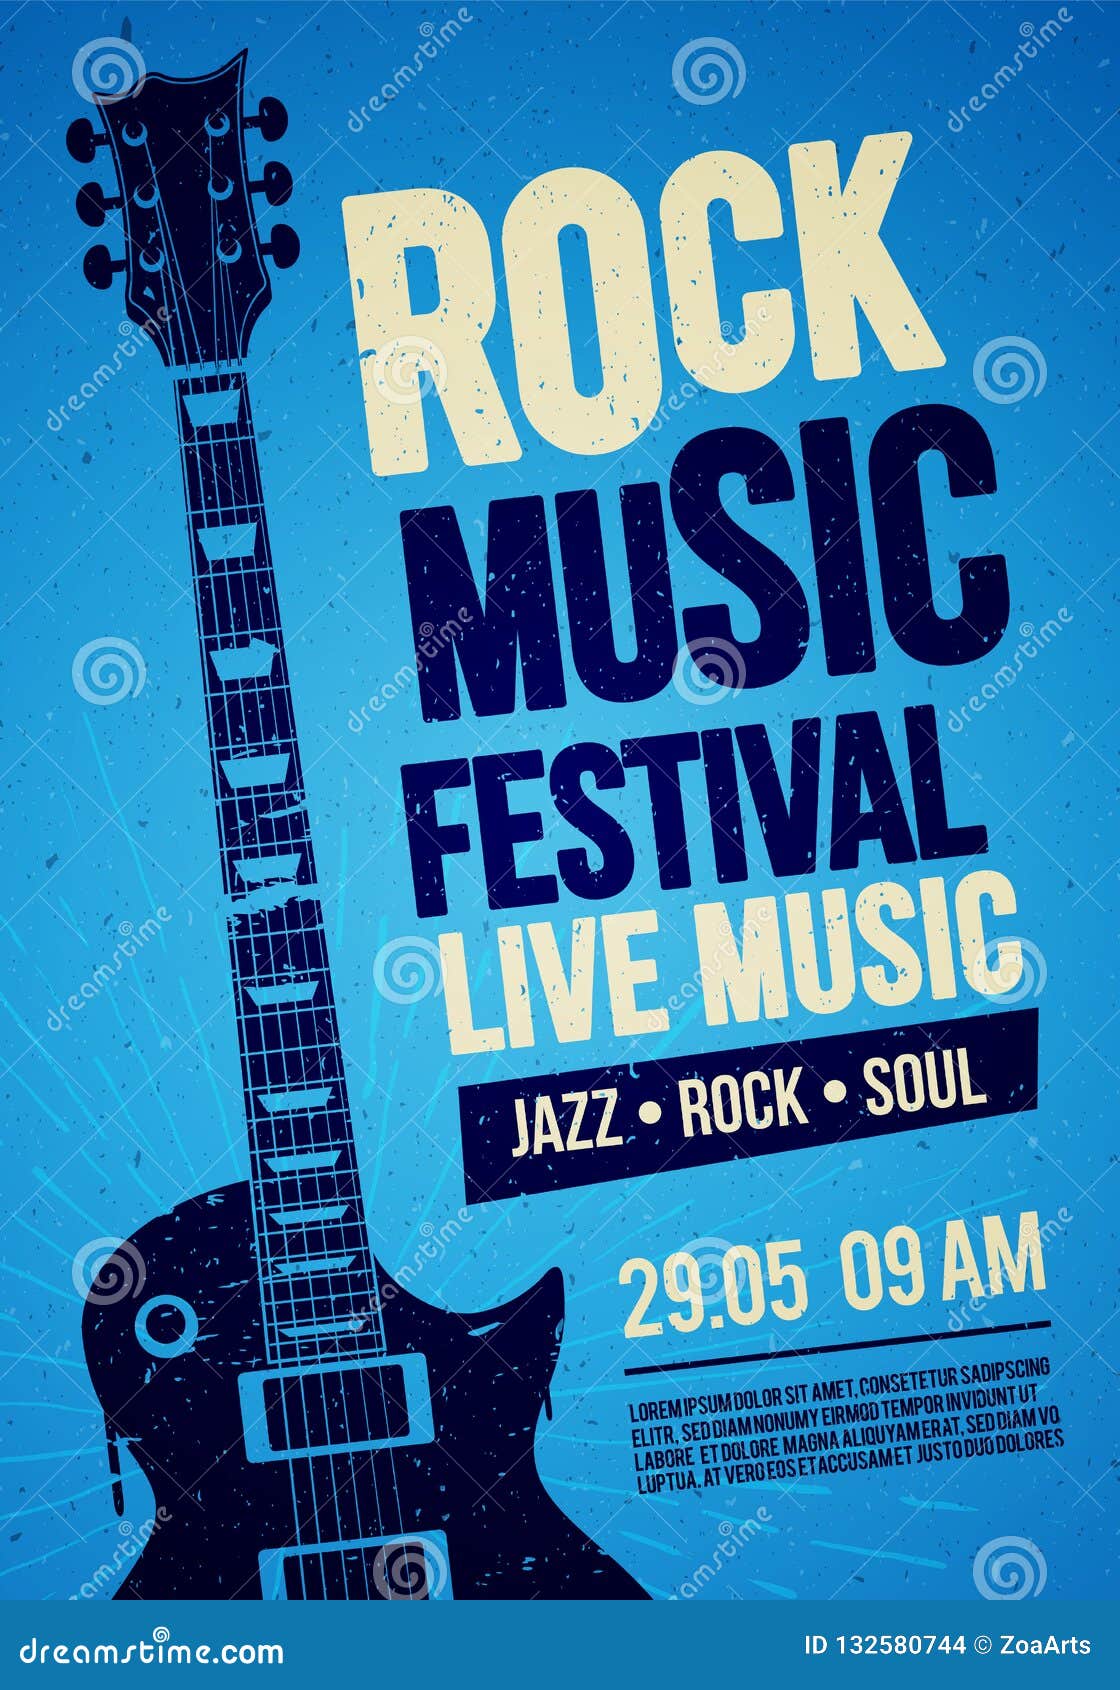   rock festival concert event flyer or poster  with guitar and vintage effects